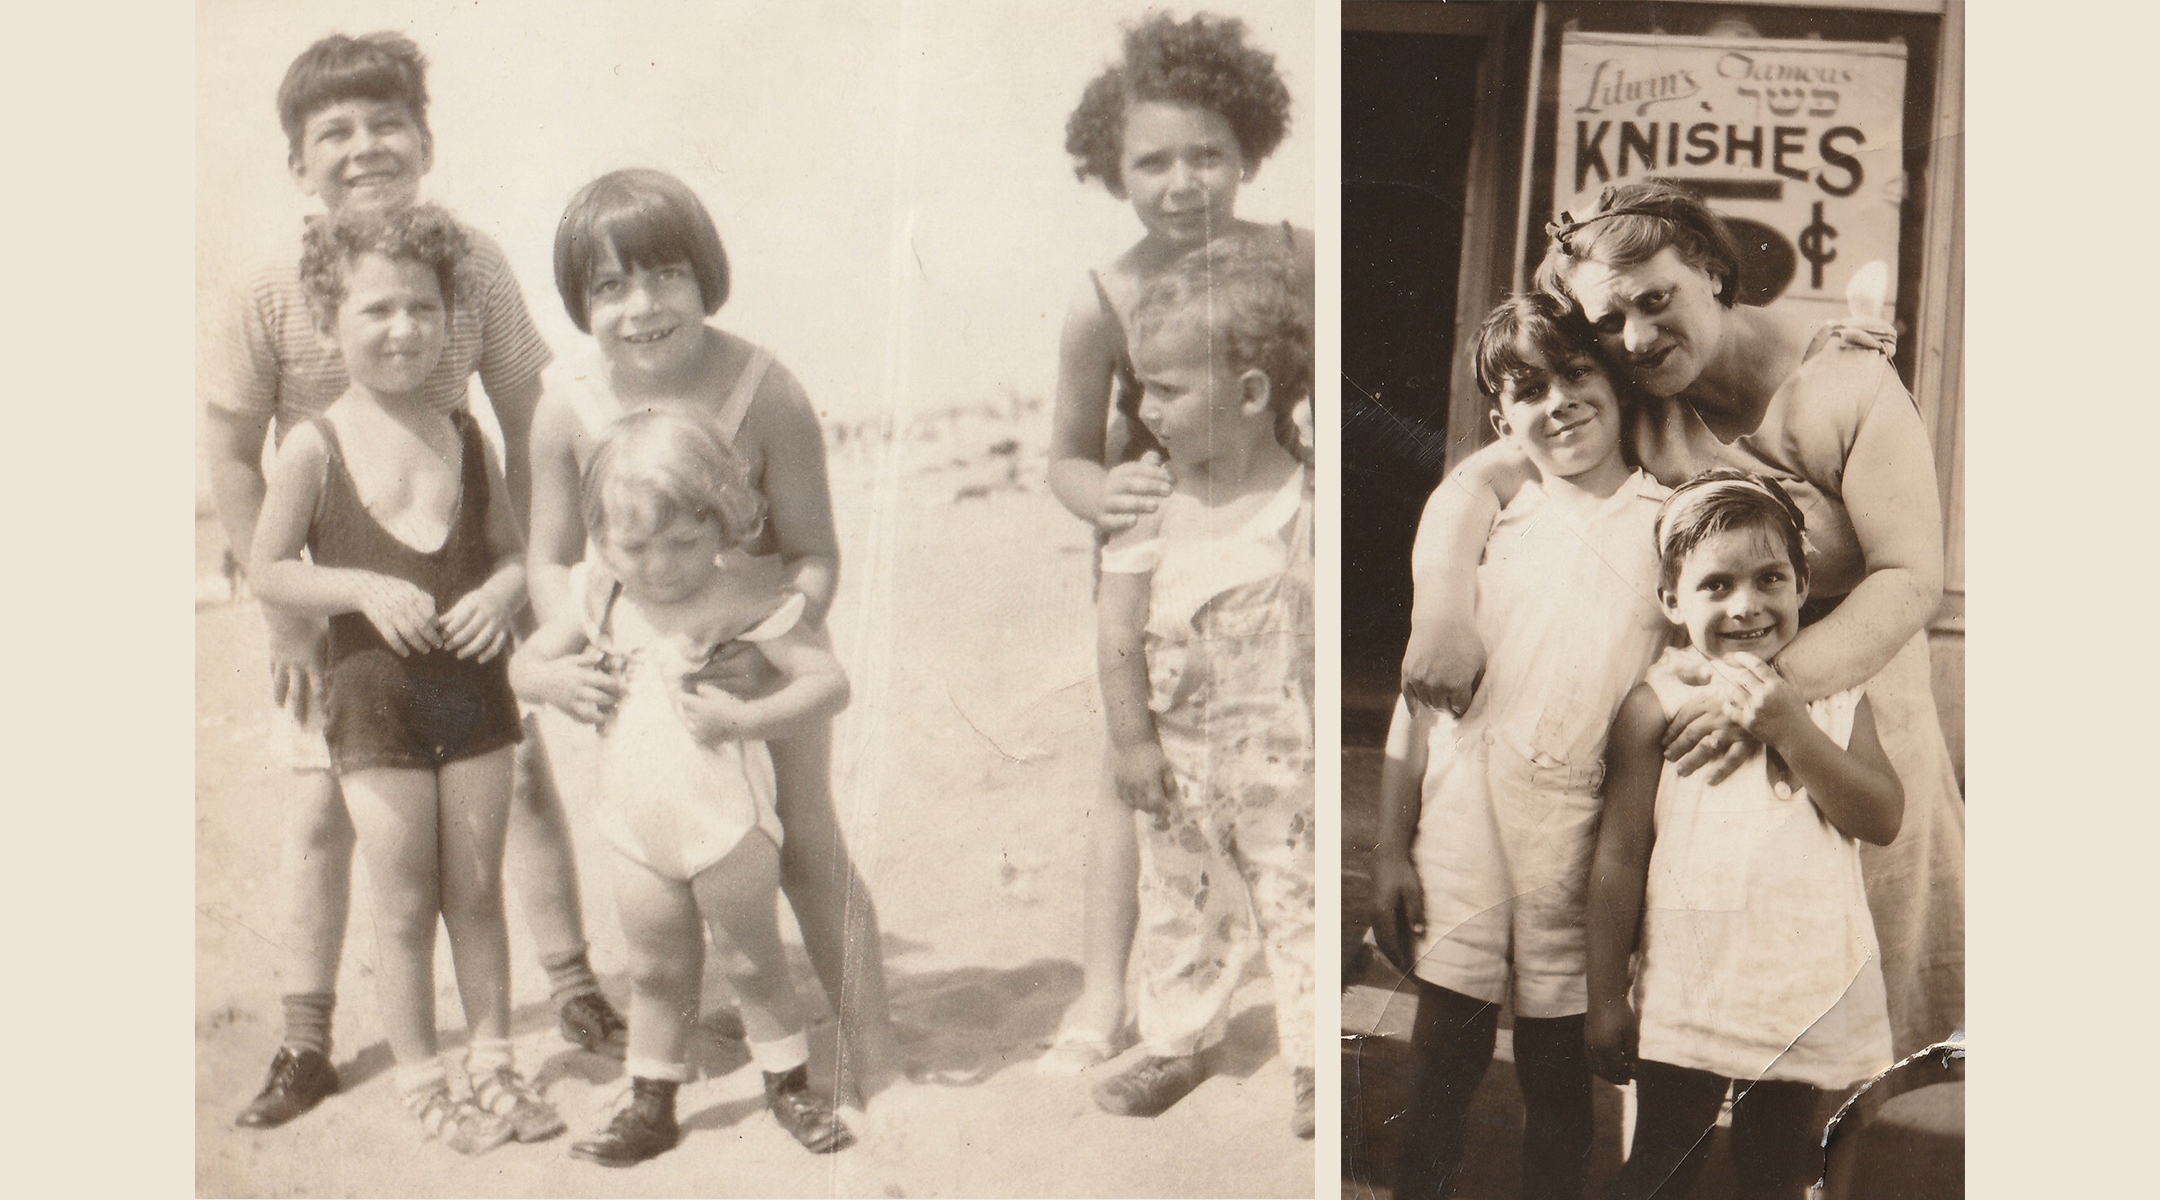 A Jewish grandmother’s Coney Island memories inspire a new album by her composer grandson